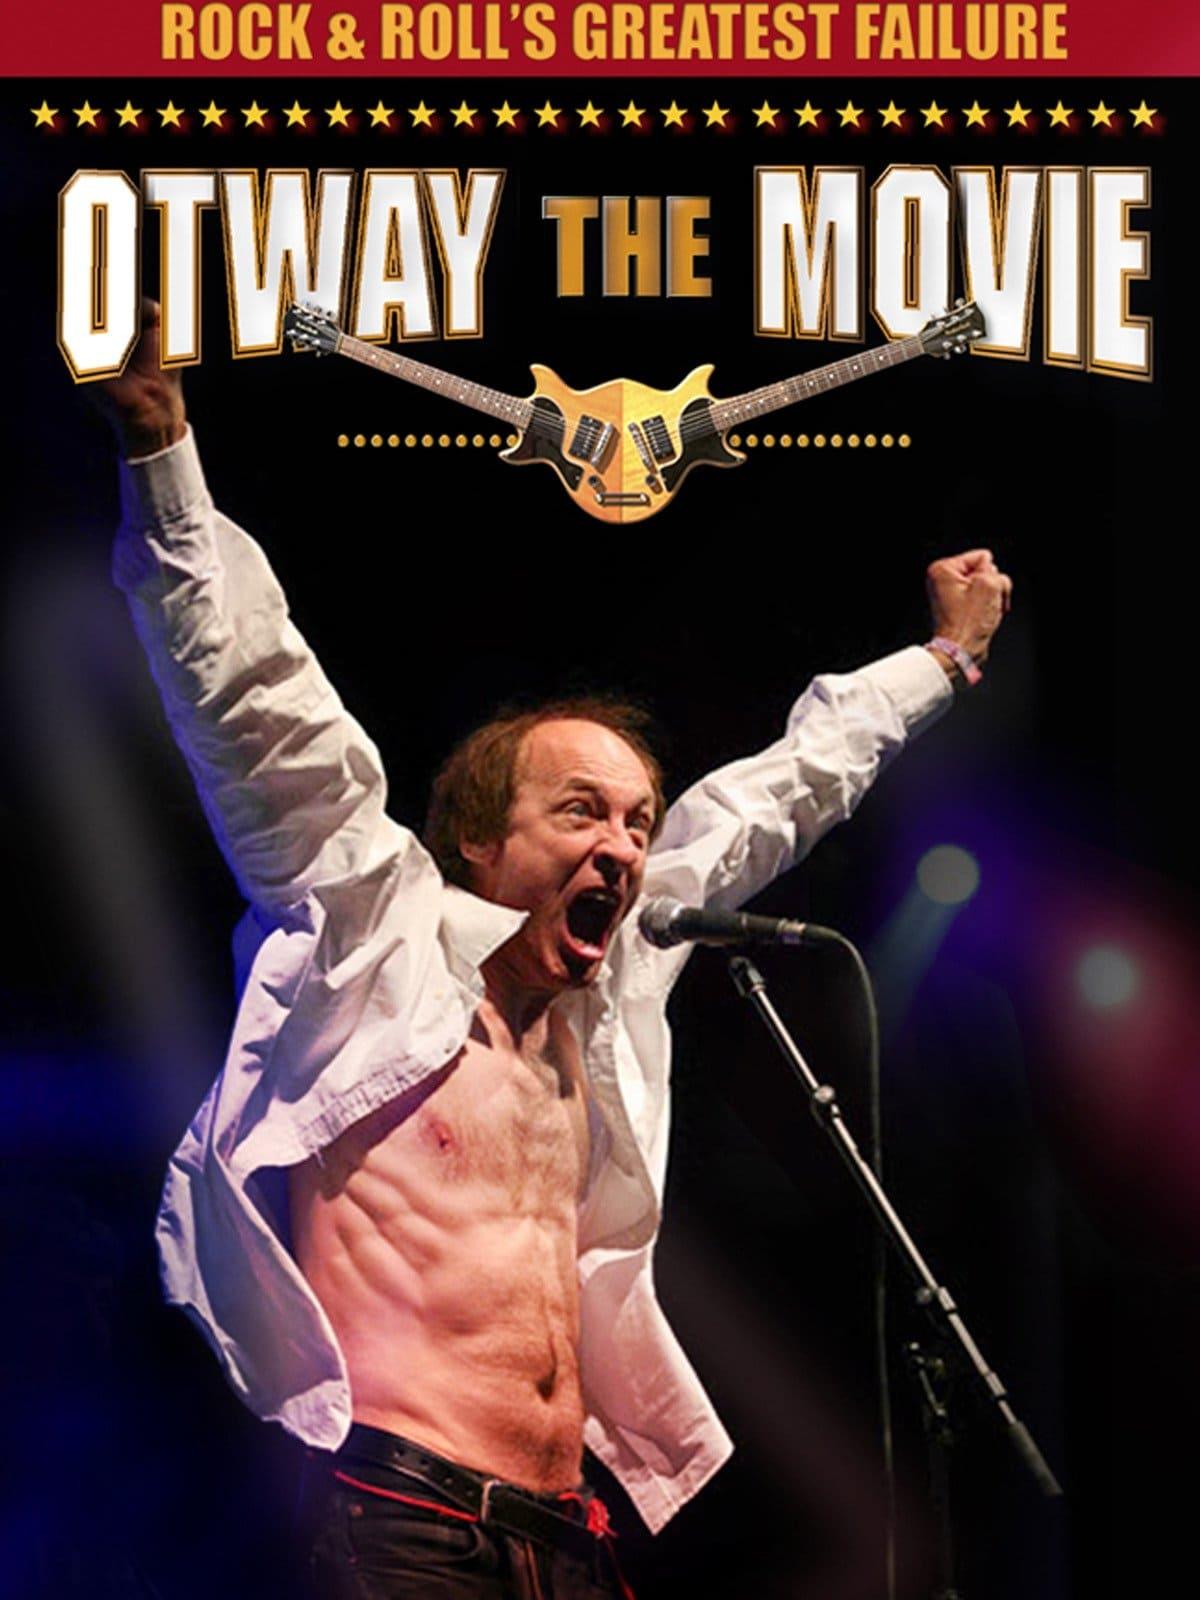 Rock and Roll's Greatest Failure: Otway the Movie poster